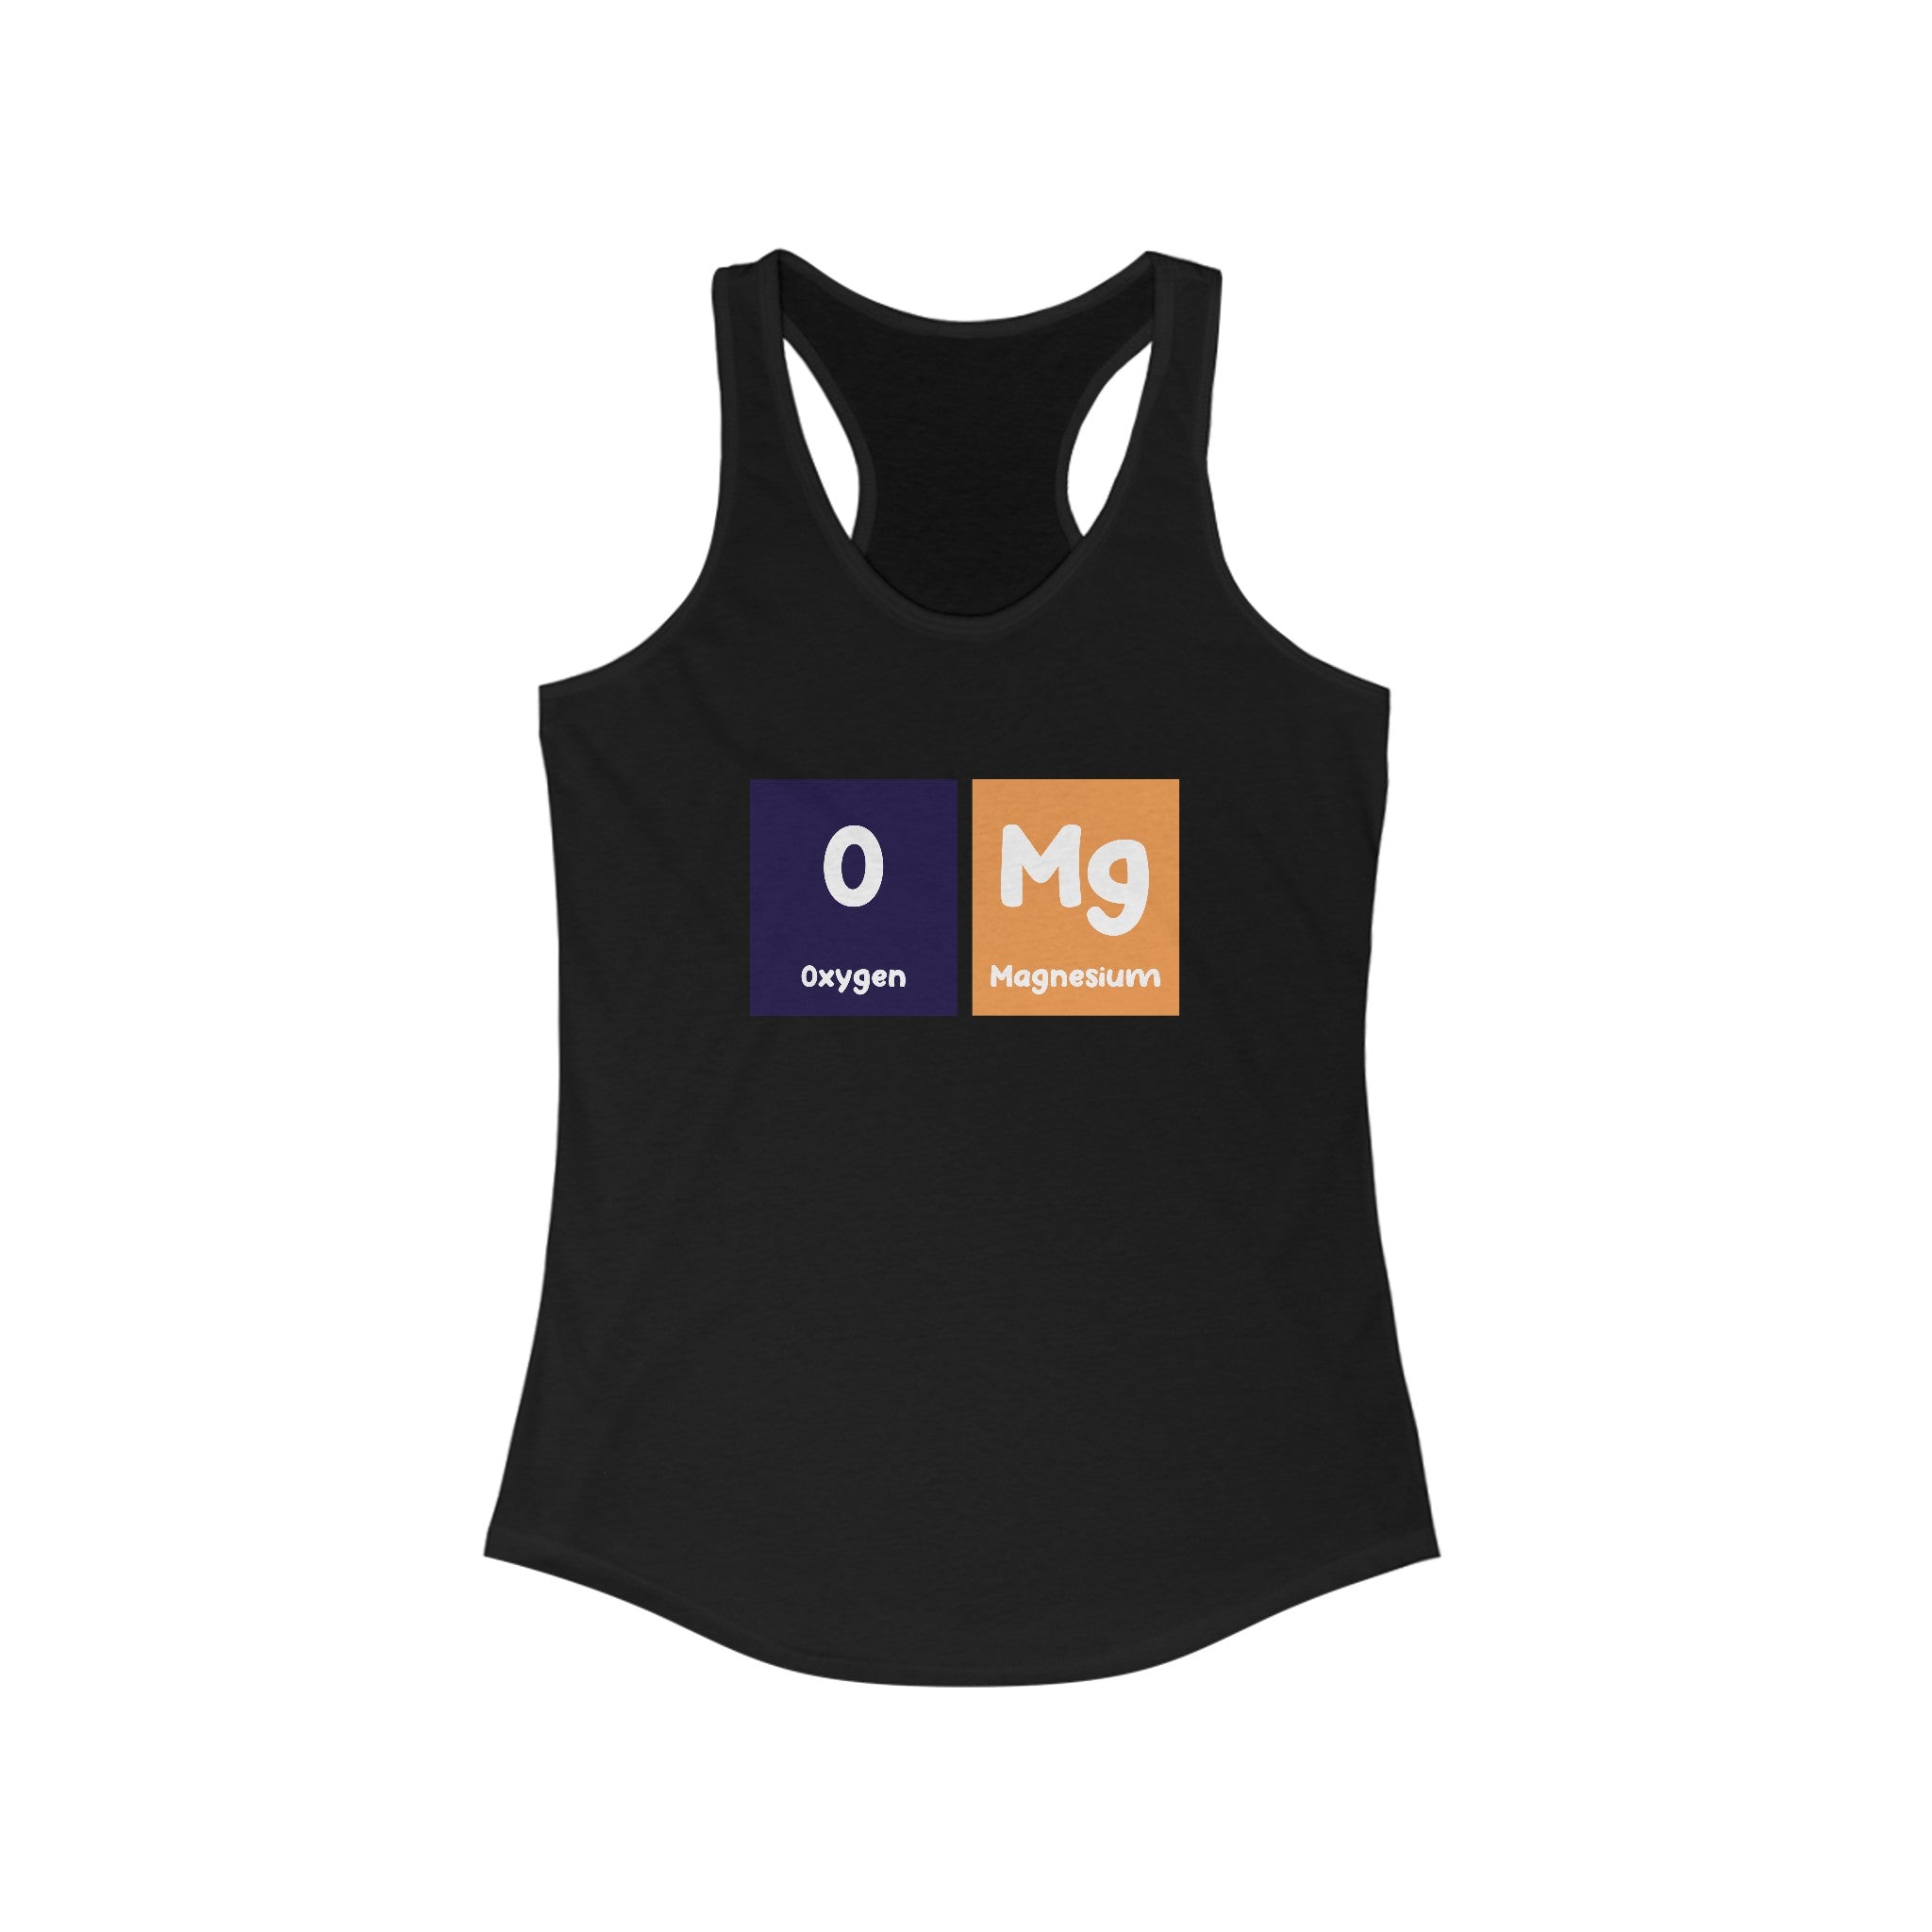 Discover style and comfort with this black O-Mg - Women's Racerback Tank, featuring a clever design of the periodic table elements Oxygen (O) and Magnesium (Mg), spelling out "O Mg." Perfect for an active lifestyle.